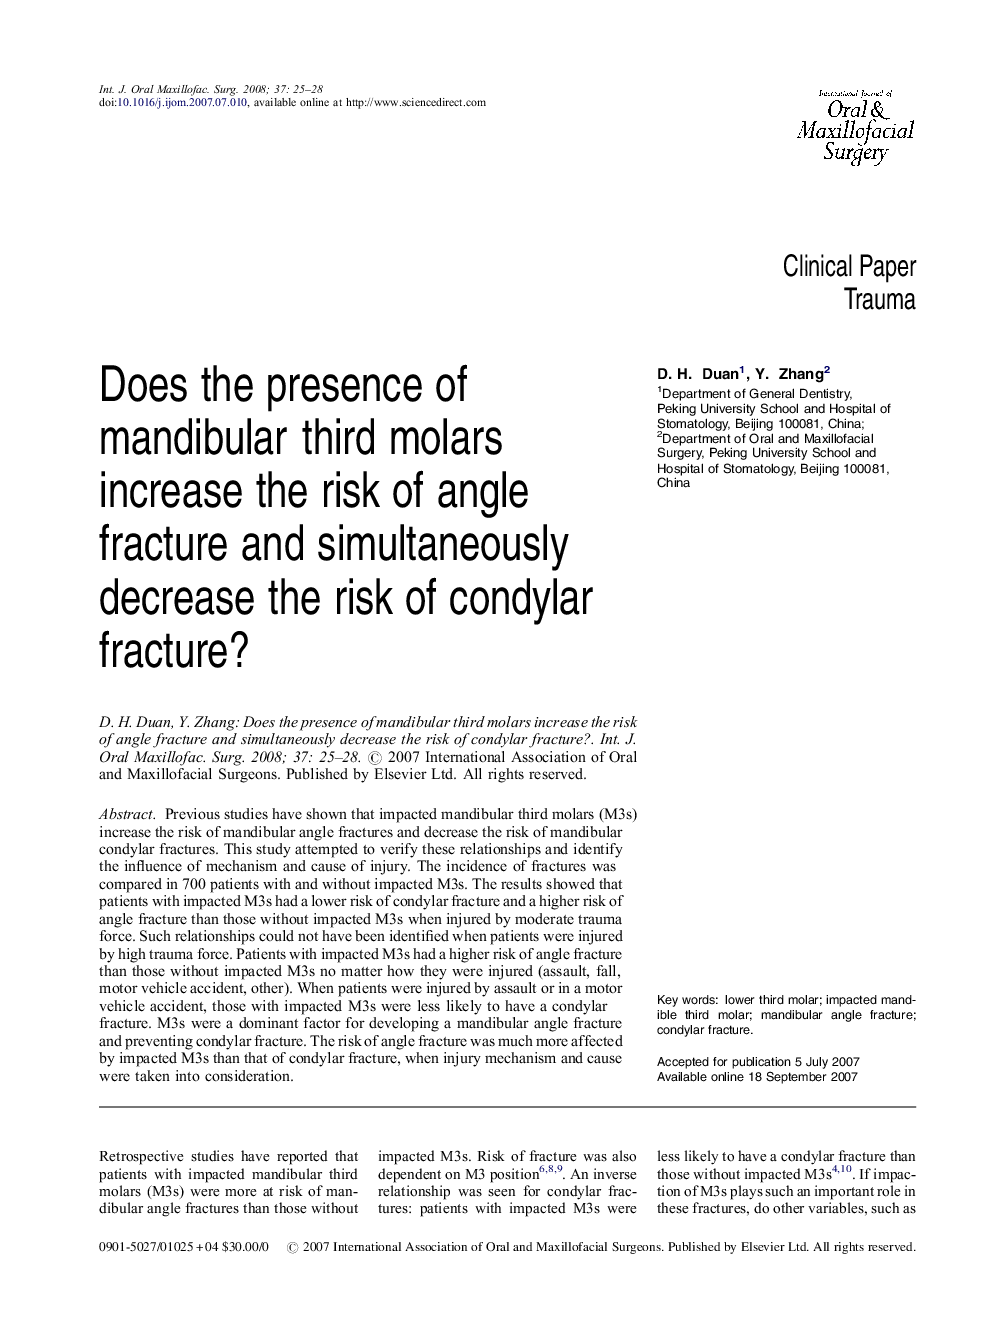 Does the presence of mandibular third molars increase the risk of angle fracture and simultaneously decrease the risk of condylar fracture?